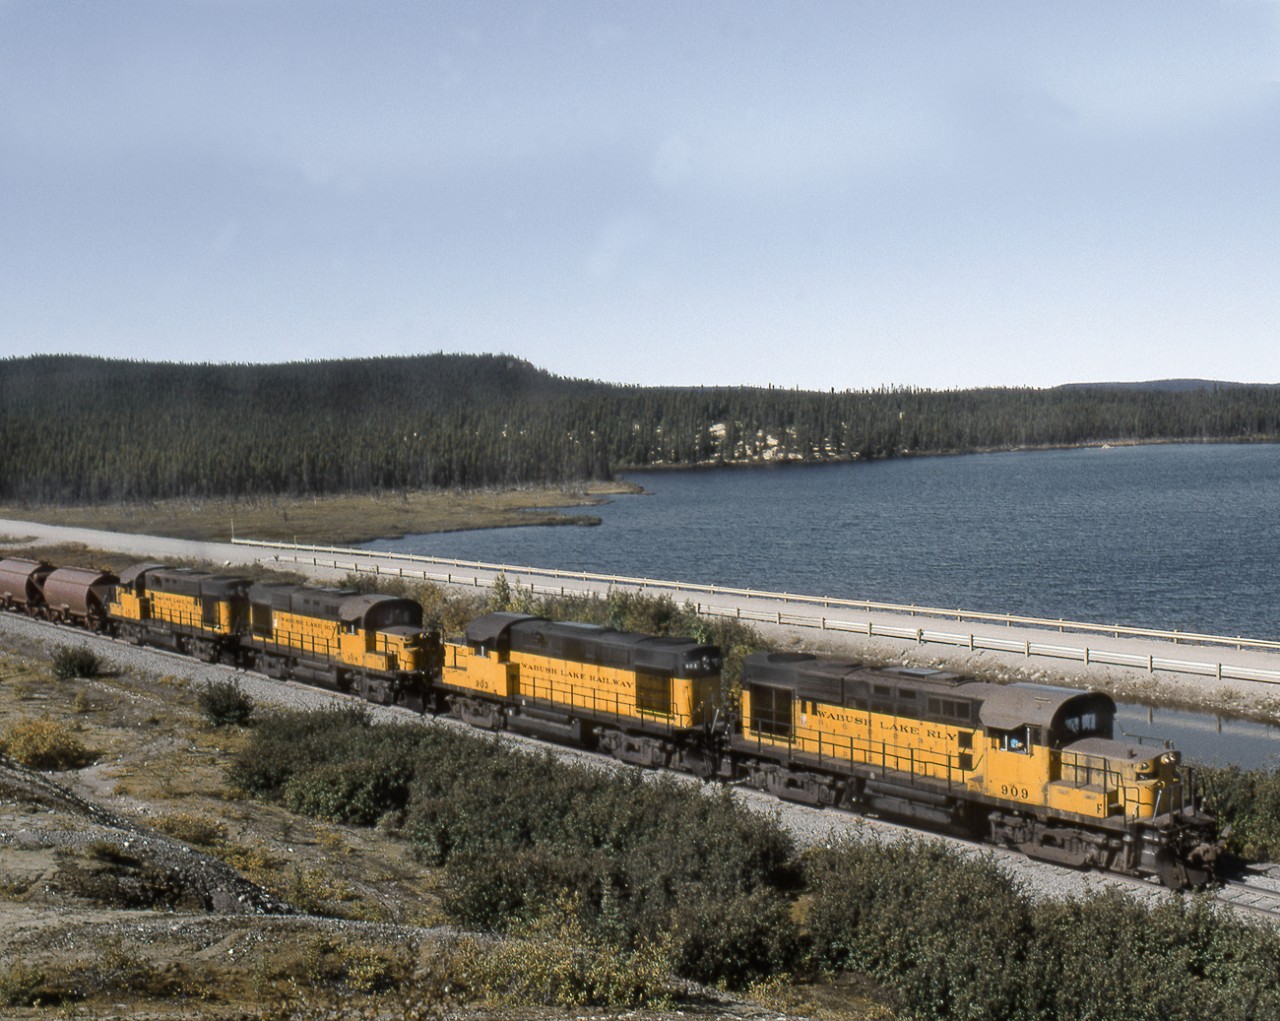 4 Wabush Lake Railway RS18's with a loaded ore train heads east on the QNSL-Wabush joint Northernland Subdivision. The Wabush will deliver the ore to Emeril Junction where QNSL power and crews will continue onto the Port at Sept Iles QC.